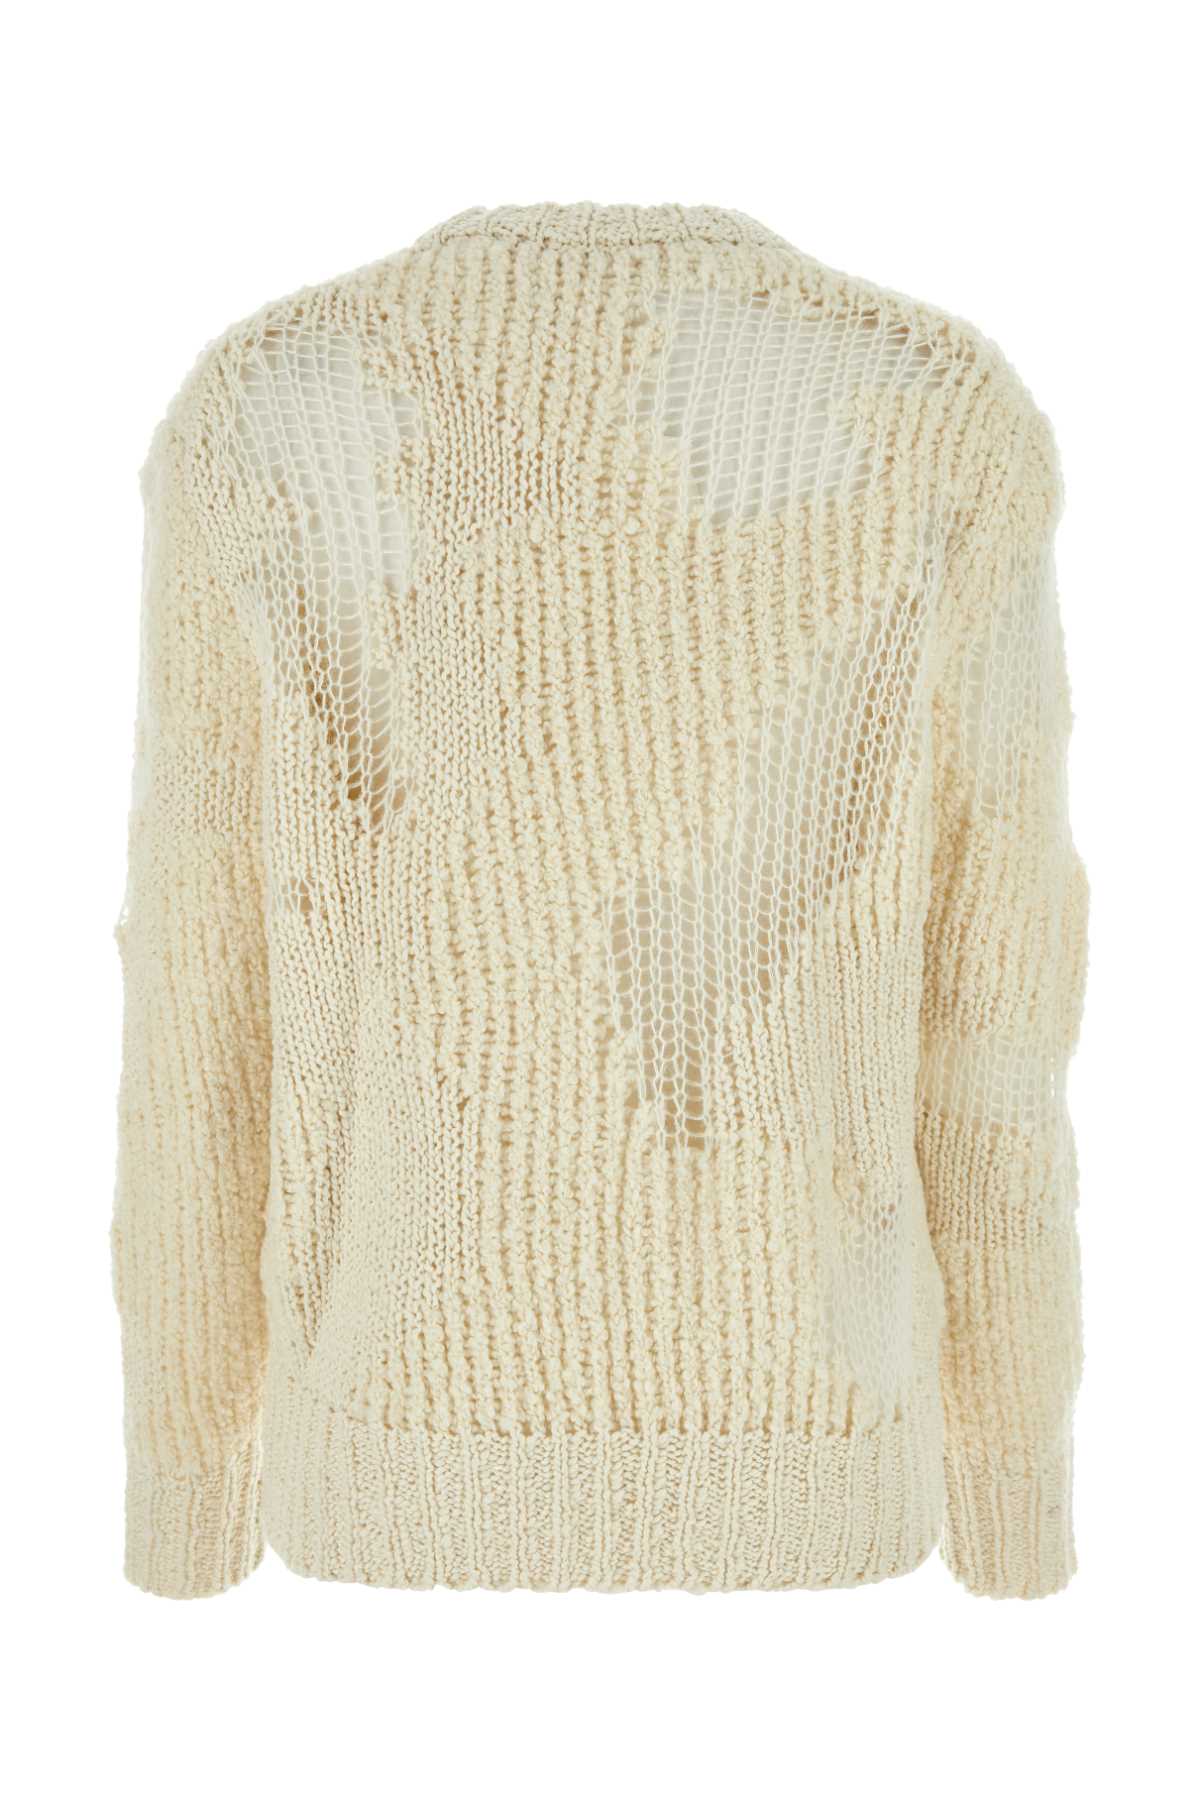 Chloé Ivory Wool Blend Jumper In Iconicmilk